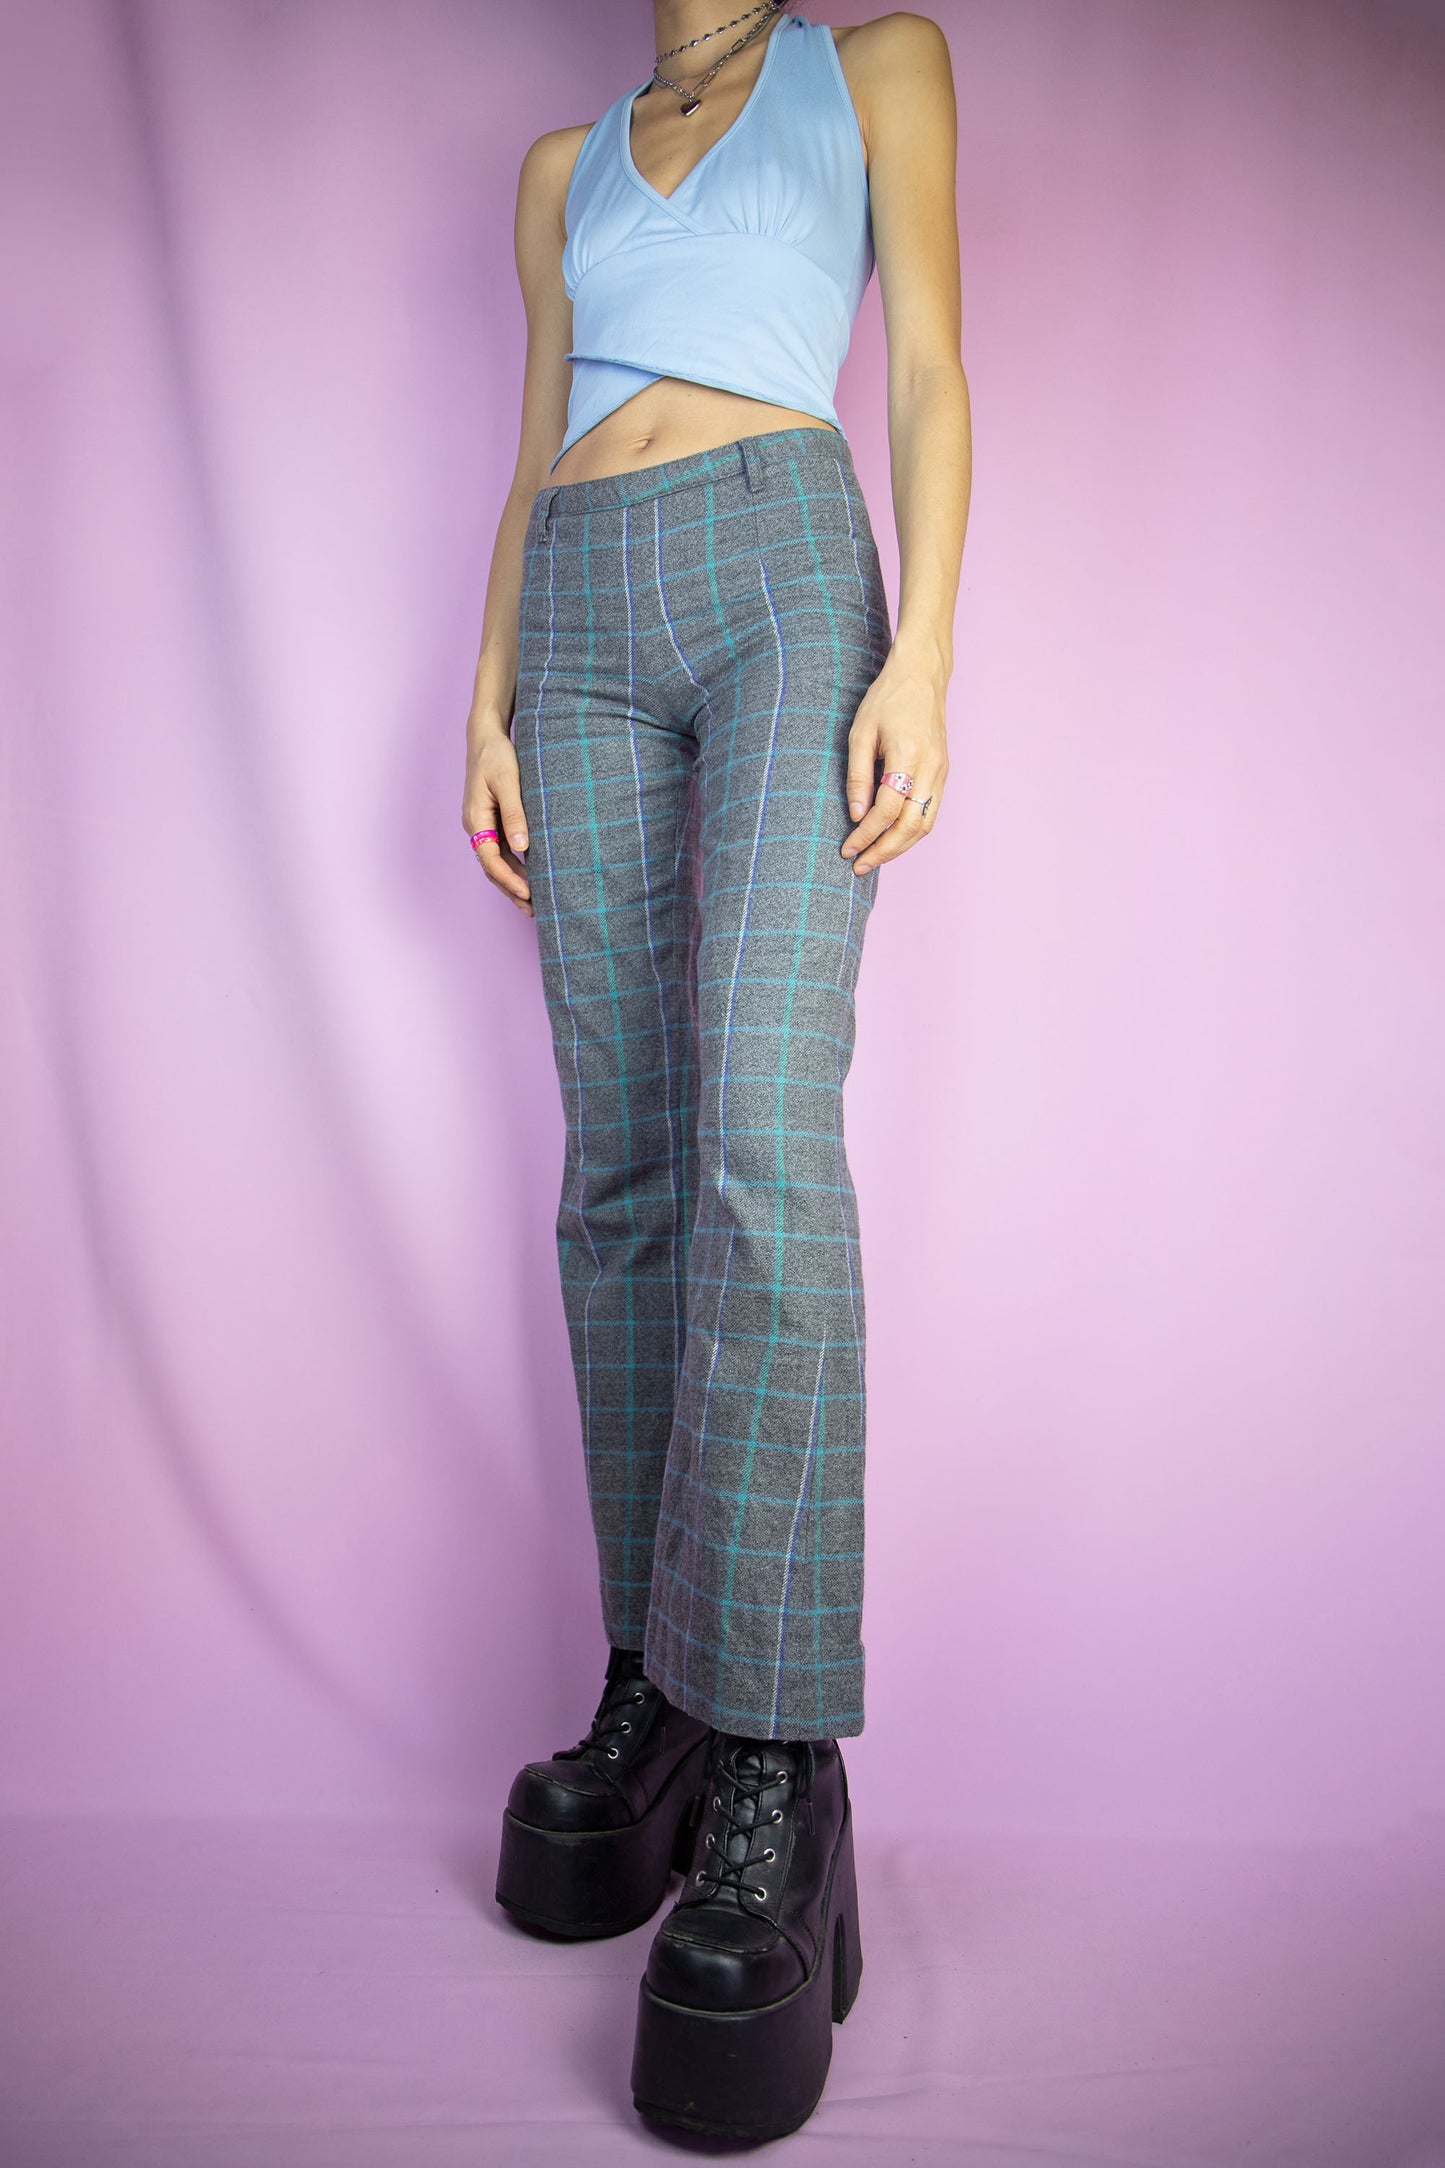 The Y2K Gray Plaid Flare Pants are vintage checkered pattern pants with a side zipper closure. Preppy office 2000s knit trousers.